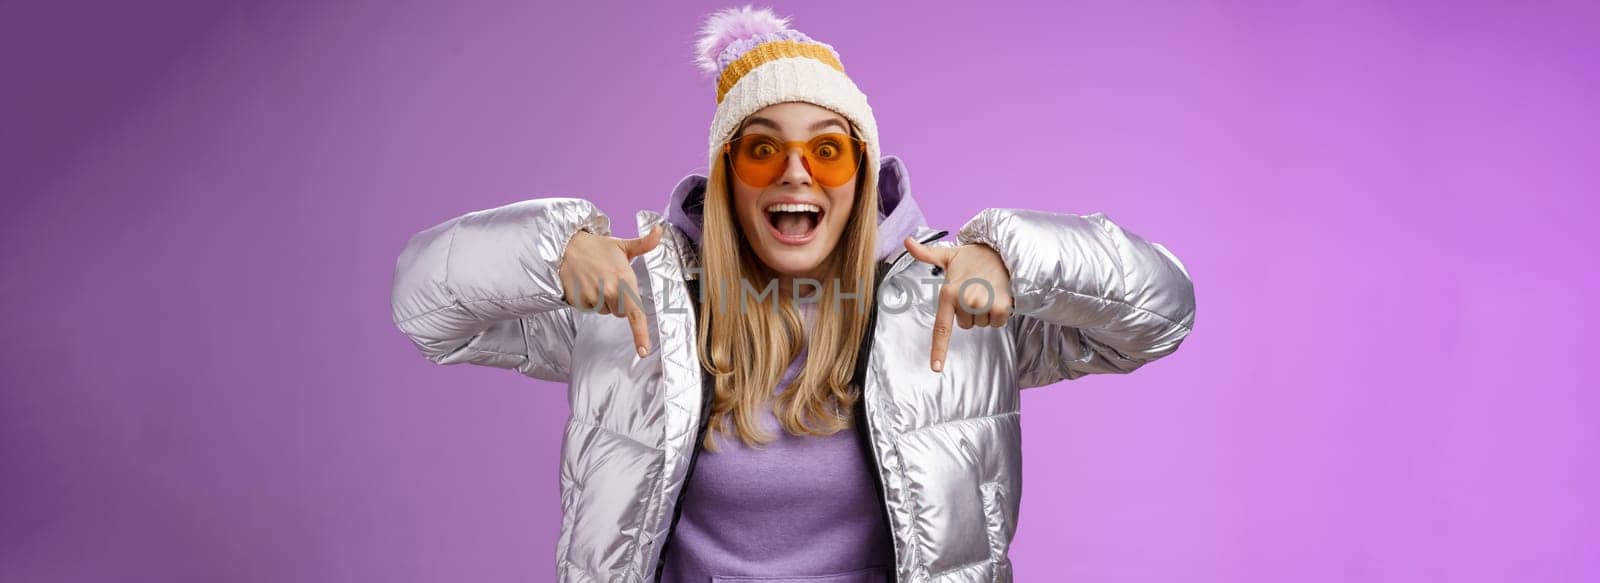 Lifestyle. Excited impressed good-looking blond girl drop jaw amused overwhelmed pointing down index fingers checking out awesome promotion standing surprised thrilled wearing silver winter jacket hat.